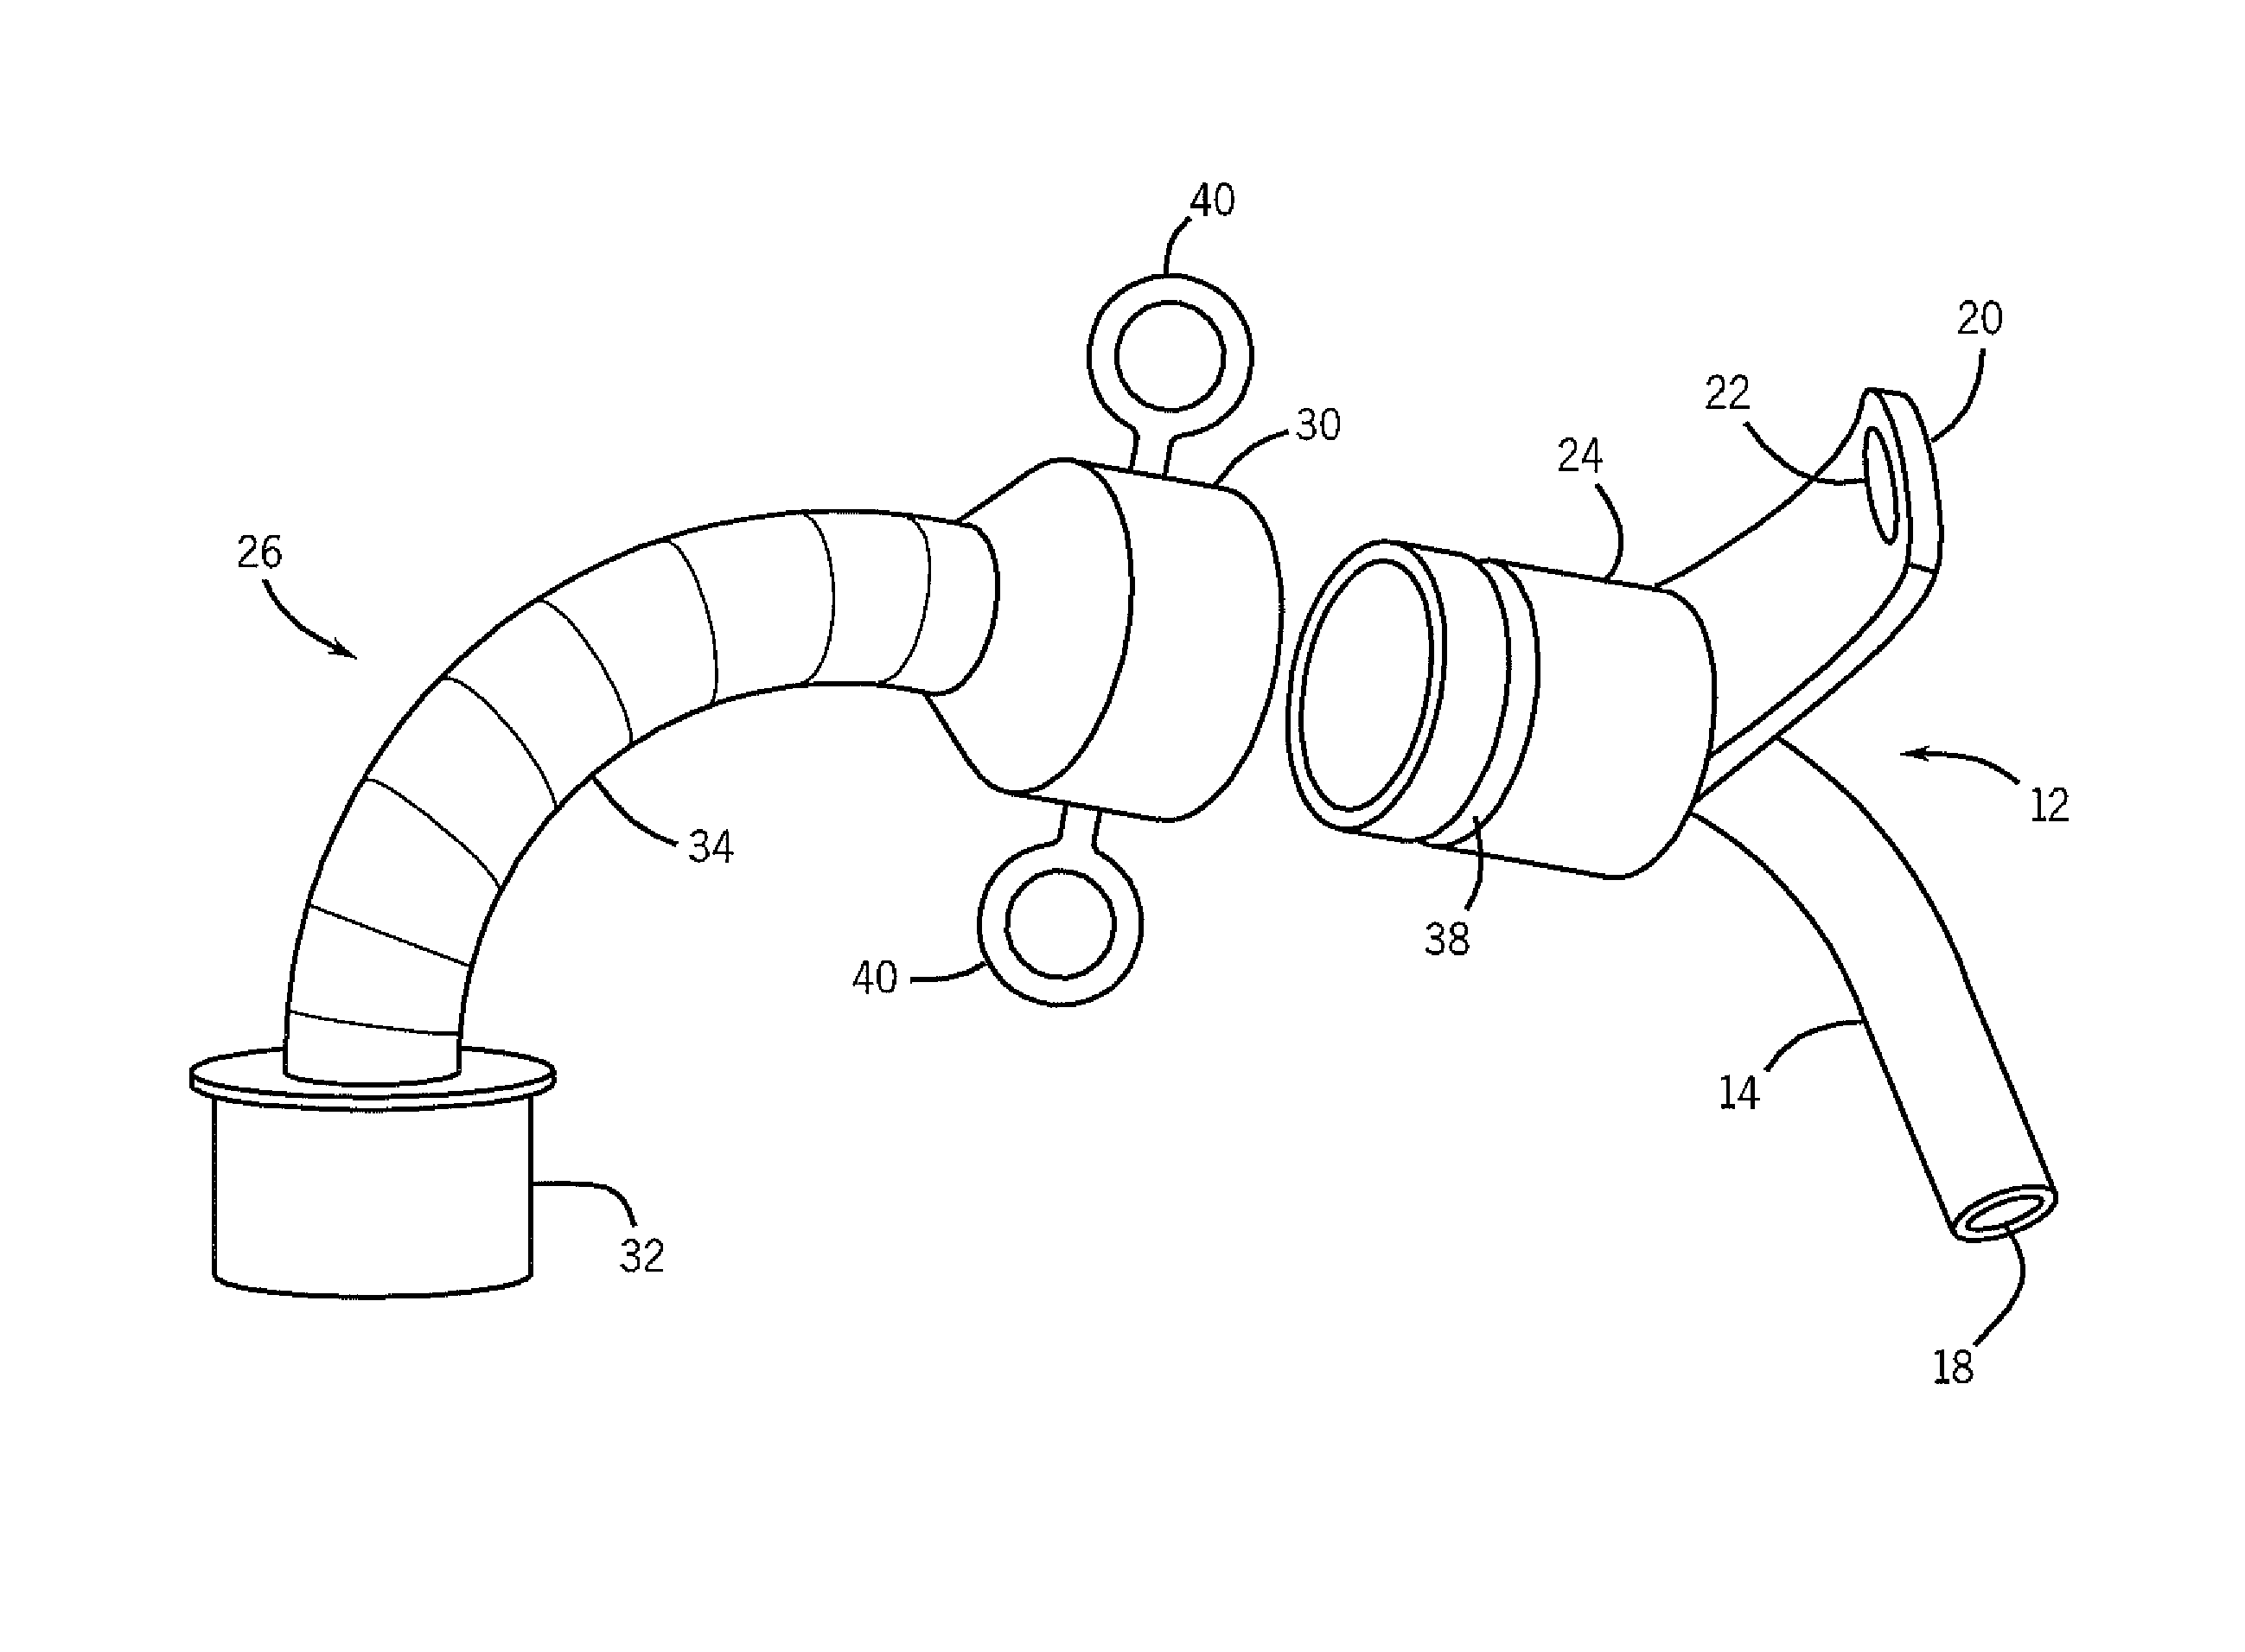 Tracheal tube and tube extension